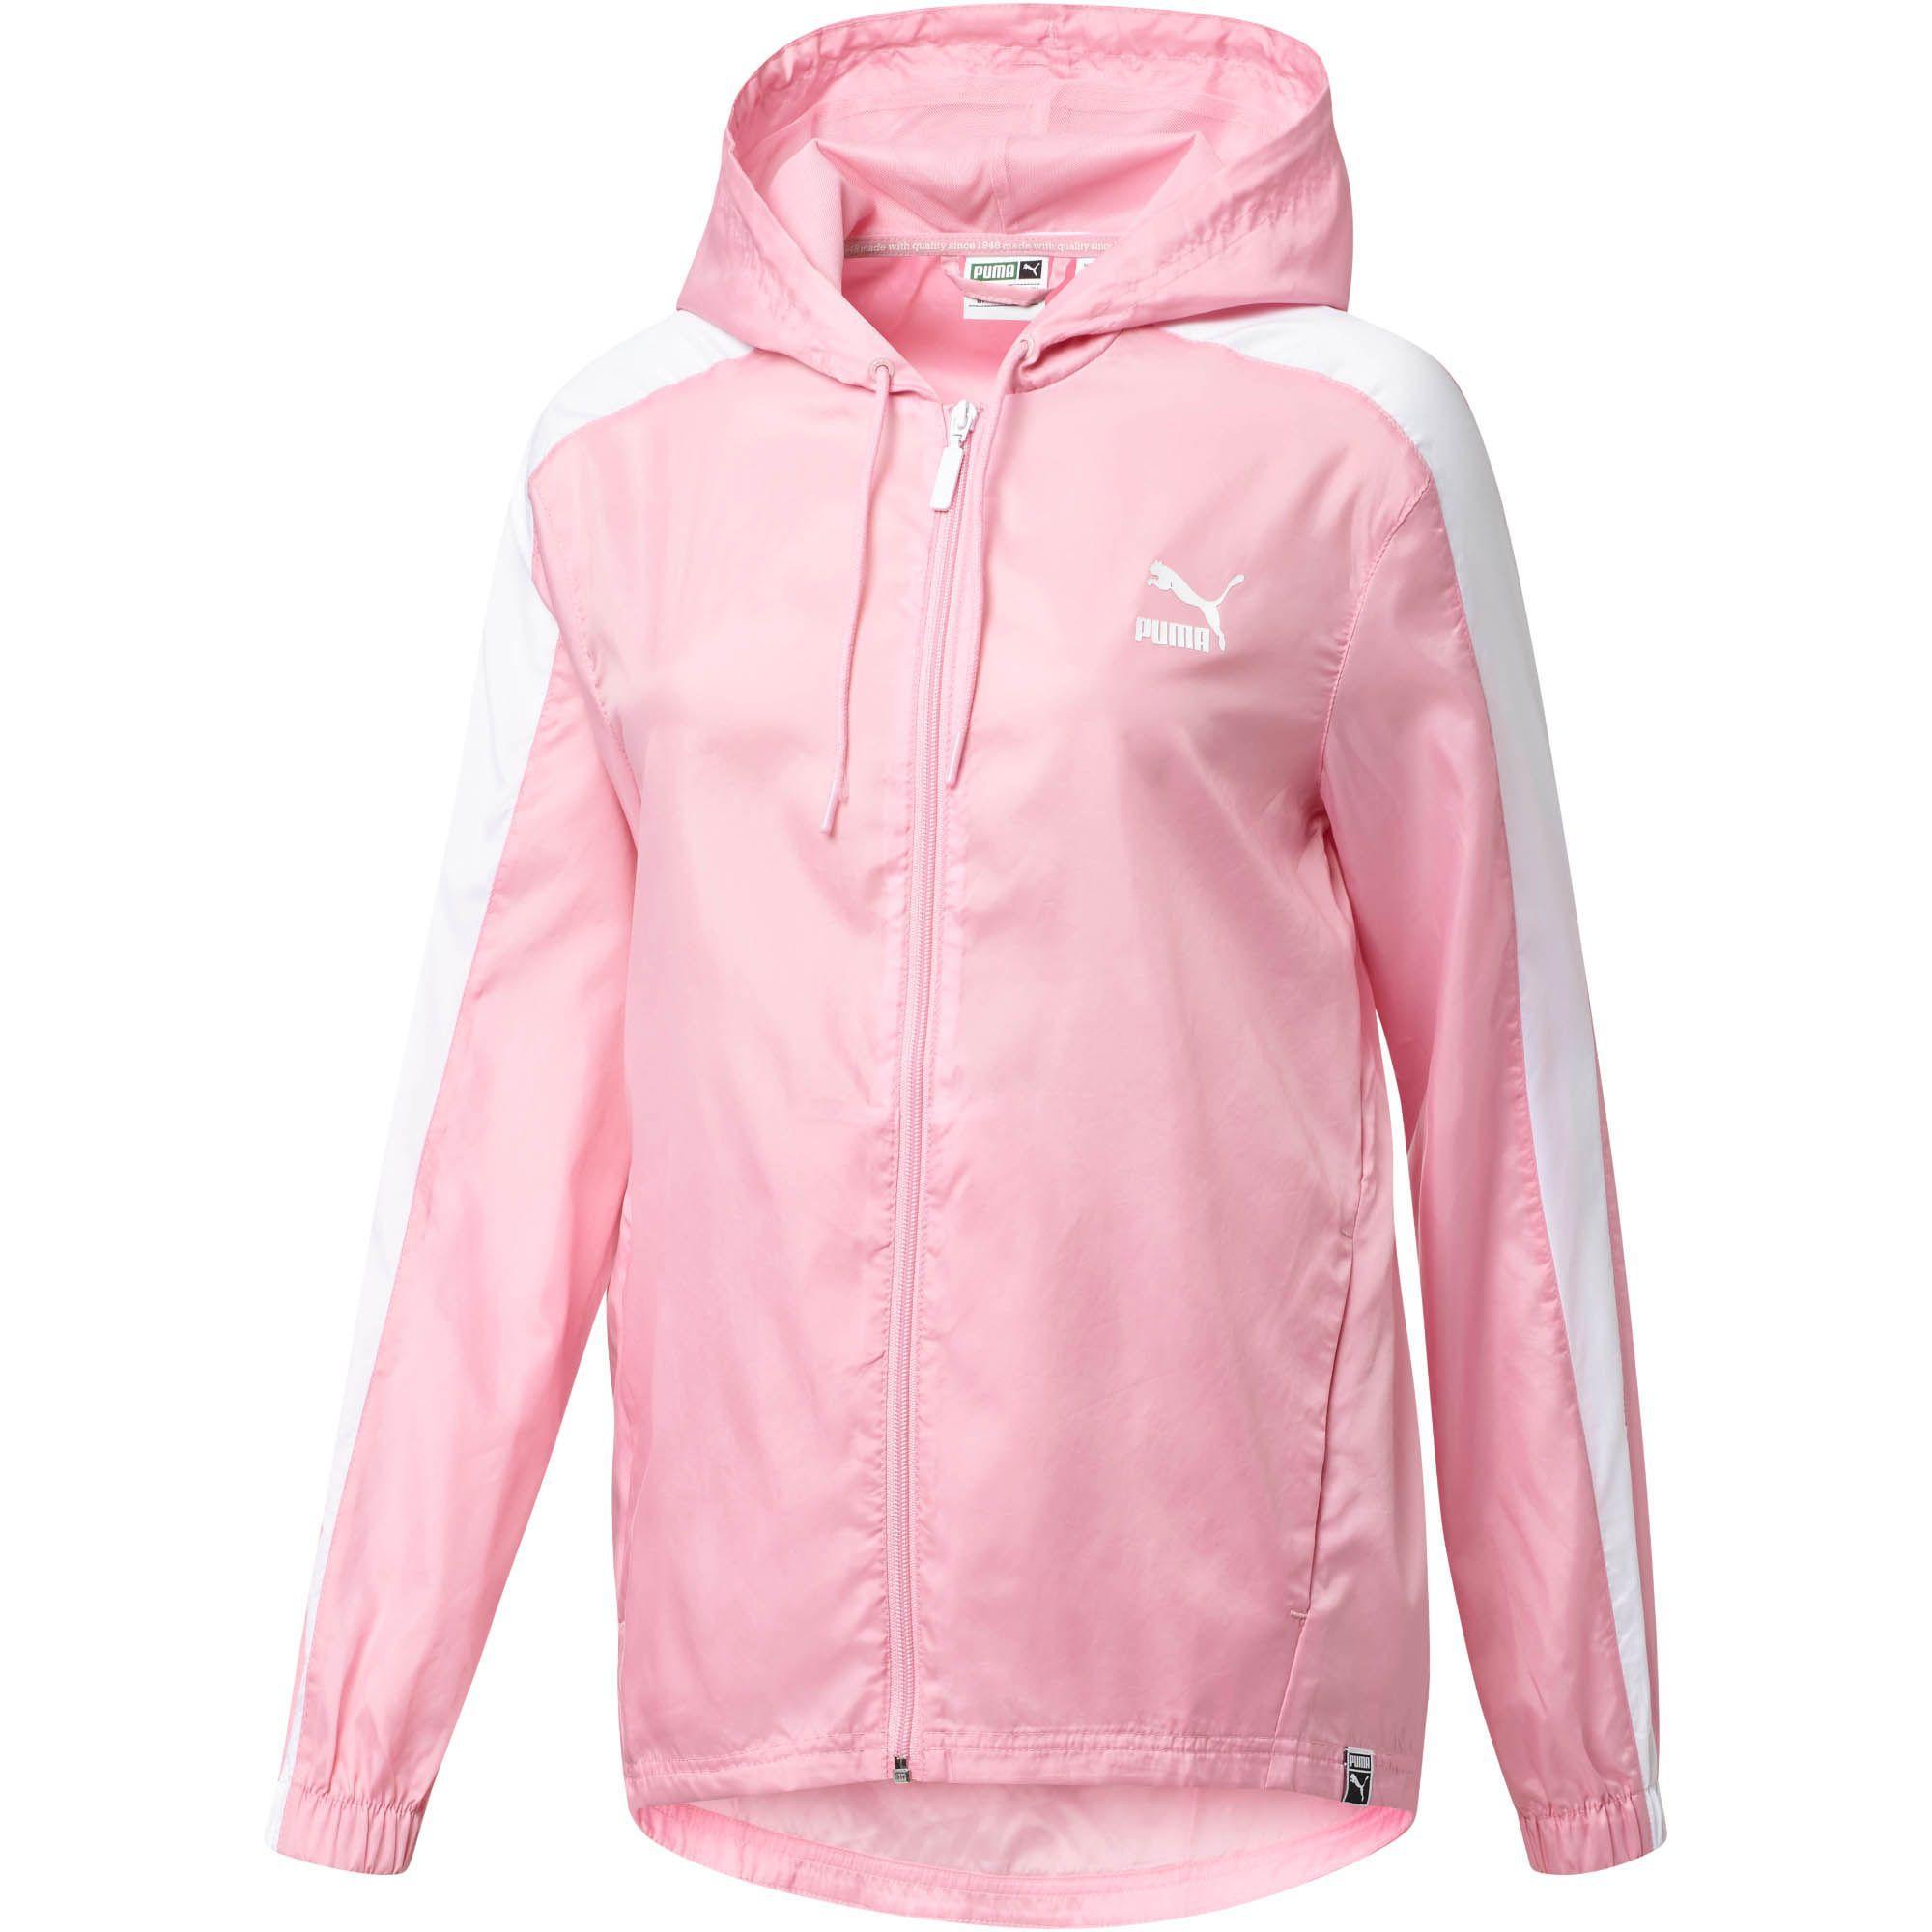 PUMA Synthetic T7 Windrunner Jacket in 